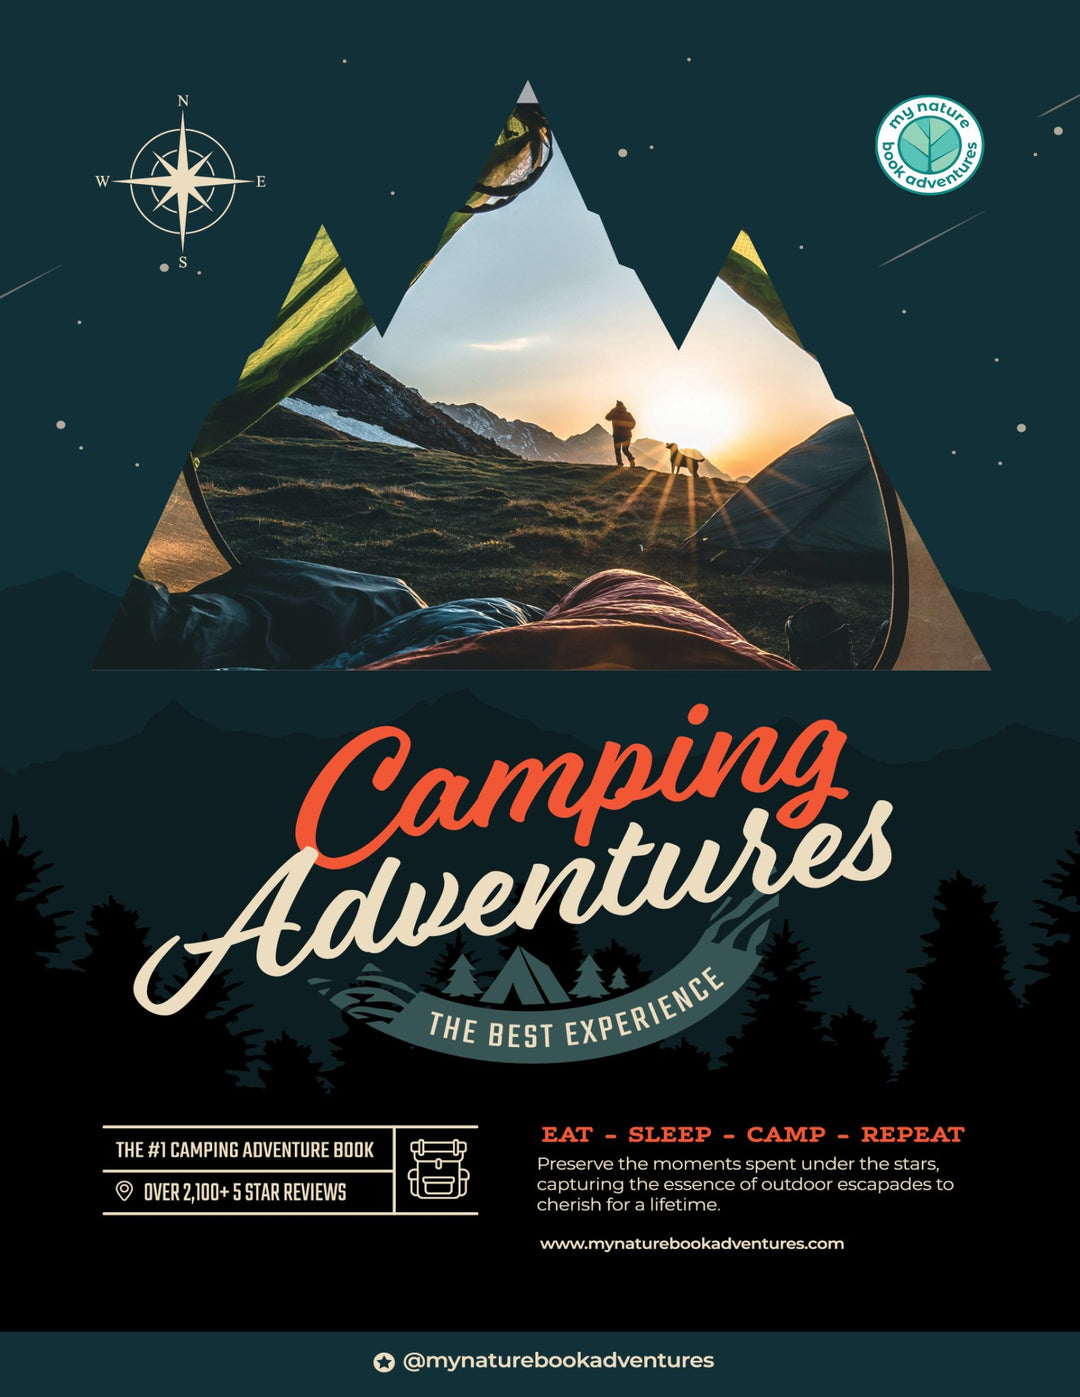 NEW - Camping Adventure Book - My Nature Book Adventures